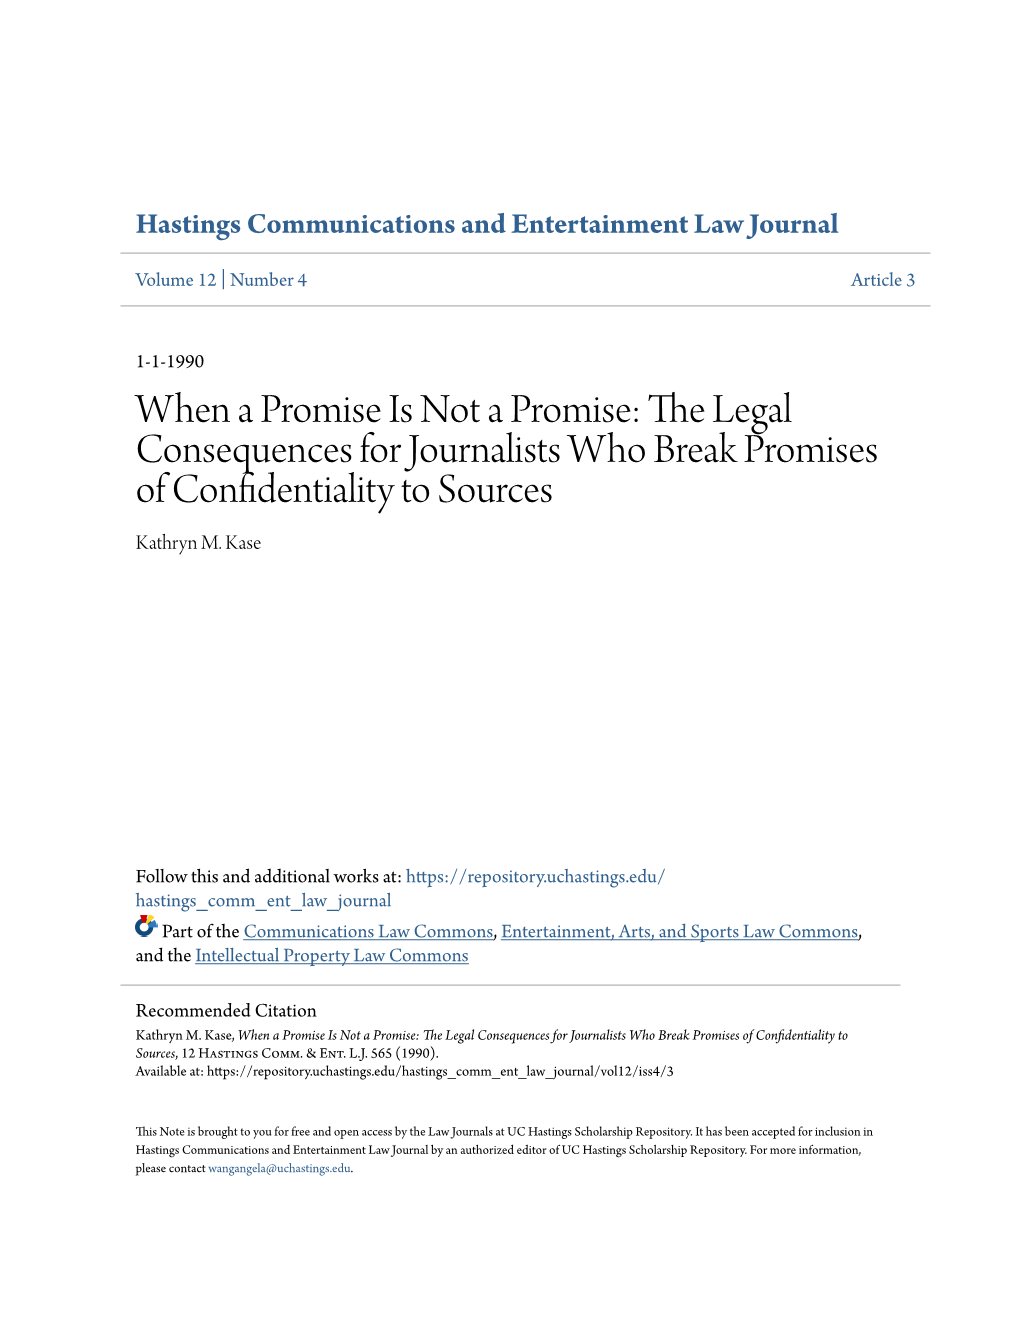 The Legal Consequences for Journalists Who Break Promises of Confidentiality to Sources Kathryn M